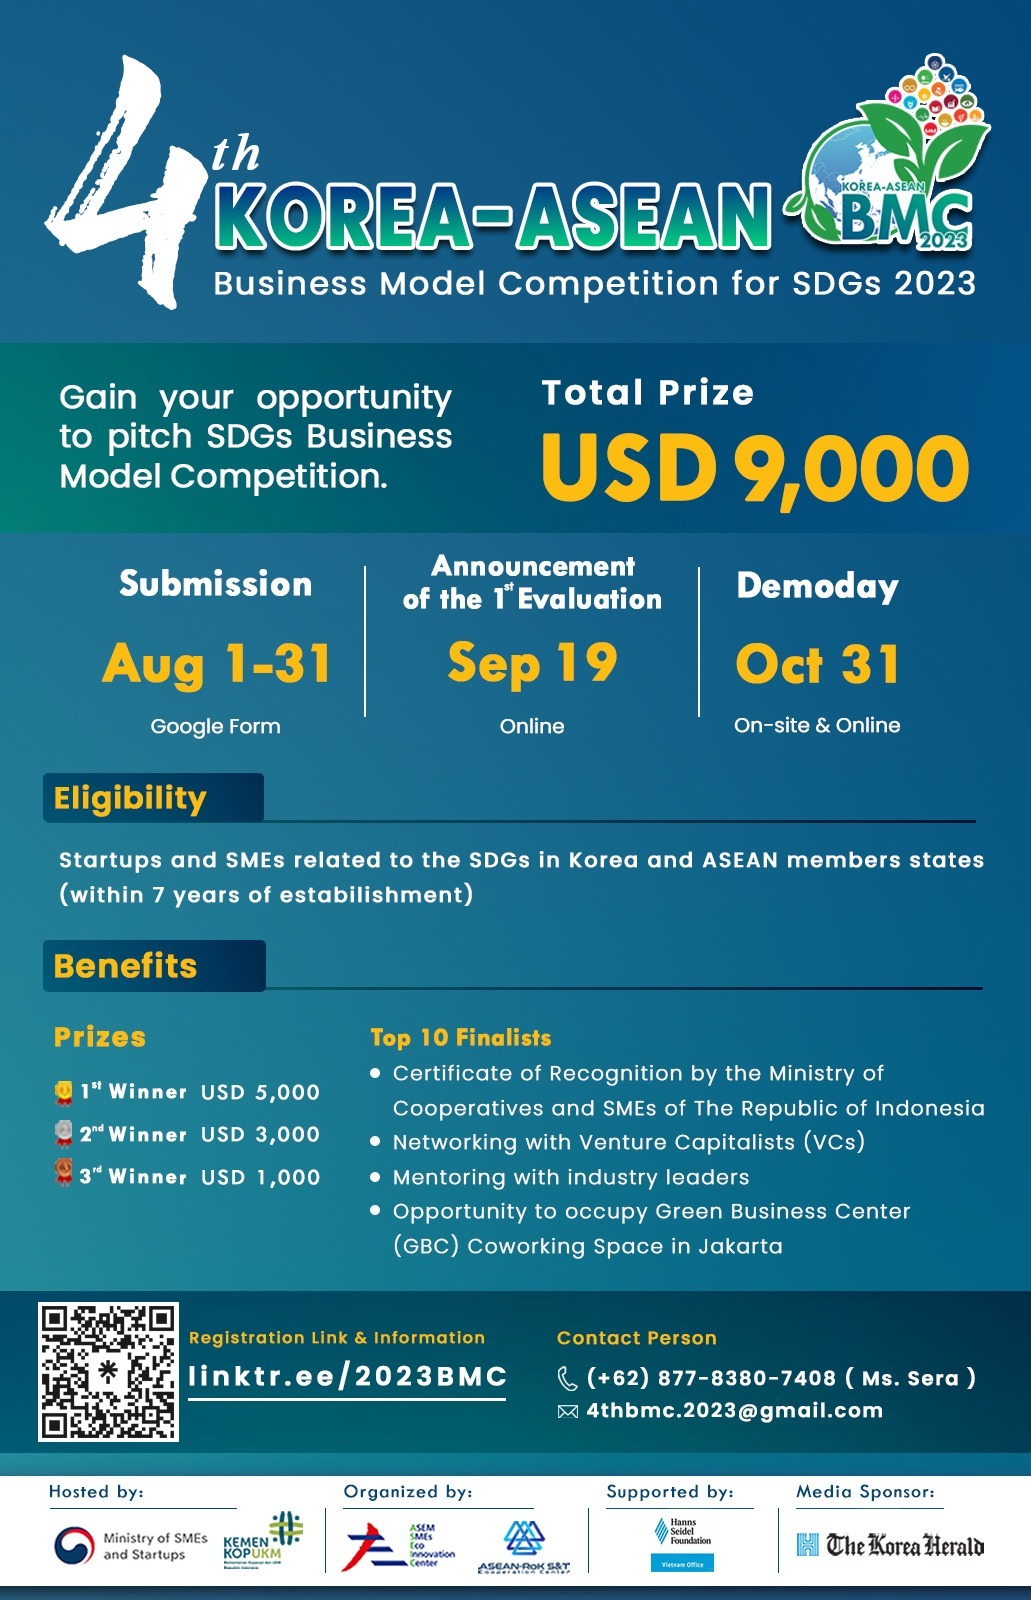 Calling all Startup and SME Founders! 📢

Is your business from Korea or SEA countries? Does it align with the SDGs? If the answers are YES, it is time to take your business to new heights. 🚀

We invite you to pitch your startup and SMEs at the 4th KOREA-ASEAN Business Model Competition for SDGs 2023. It is an annual competition hosted by the Ministry of SMEs dan Startups Republic of Korea (MSS RoK) and the Ministry of Cooperatives and SMEs of The Republic of Indonesia (Kemenkop UKM RI).

Stand a chance to win total prizes up to 9,000 USD, mentoring with industry leaders, connect with global VC investors, and MORE. 💡

Registration will be open on August 1-31. To apply and further information, go to:

https://linktr.ee/2023BMC
https://linktr.ee/2023BMC
https://linktr.ee/2023BMC